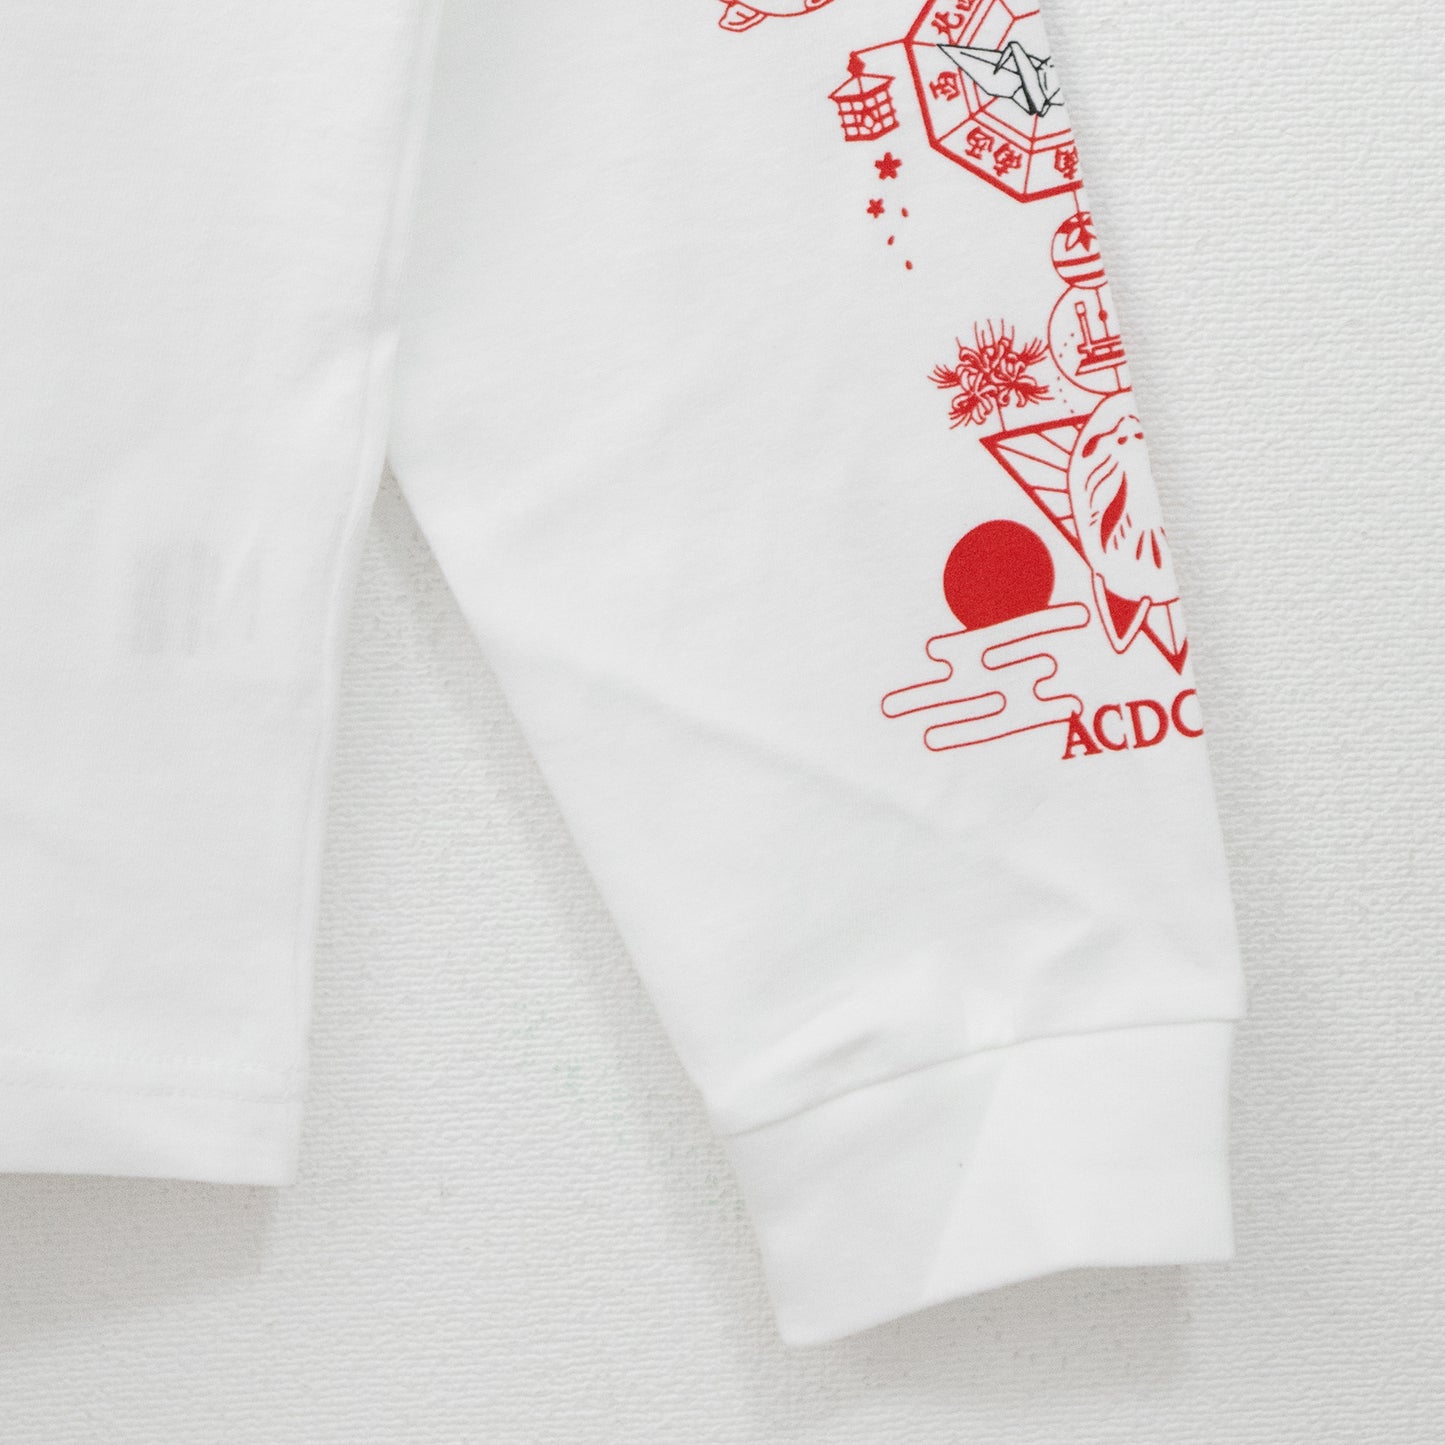 ACDC RAG Made in Japan Inari Long Sleeve T-Shirt WHITE